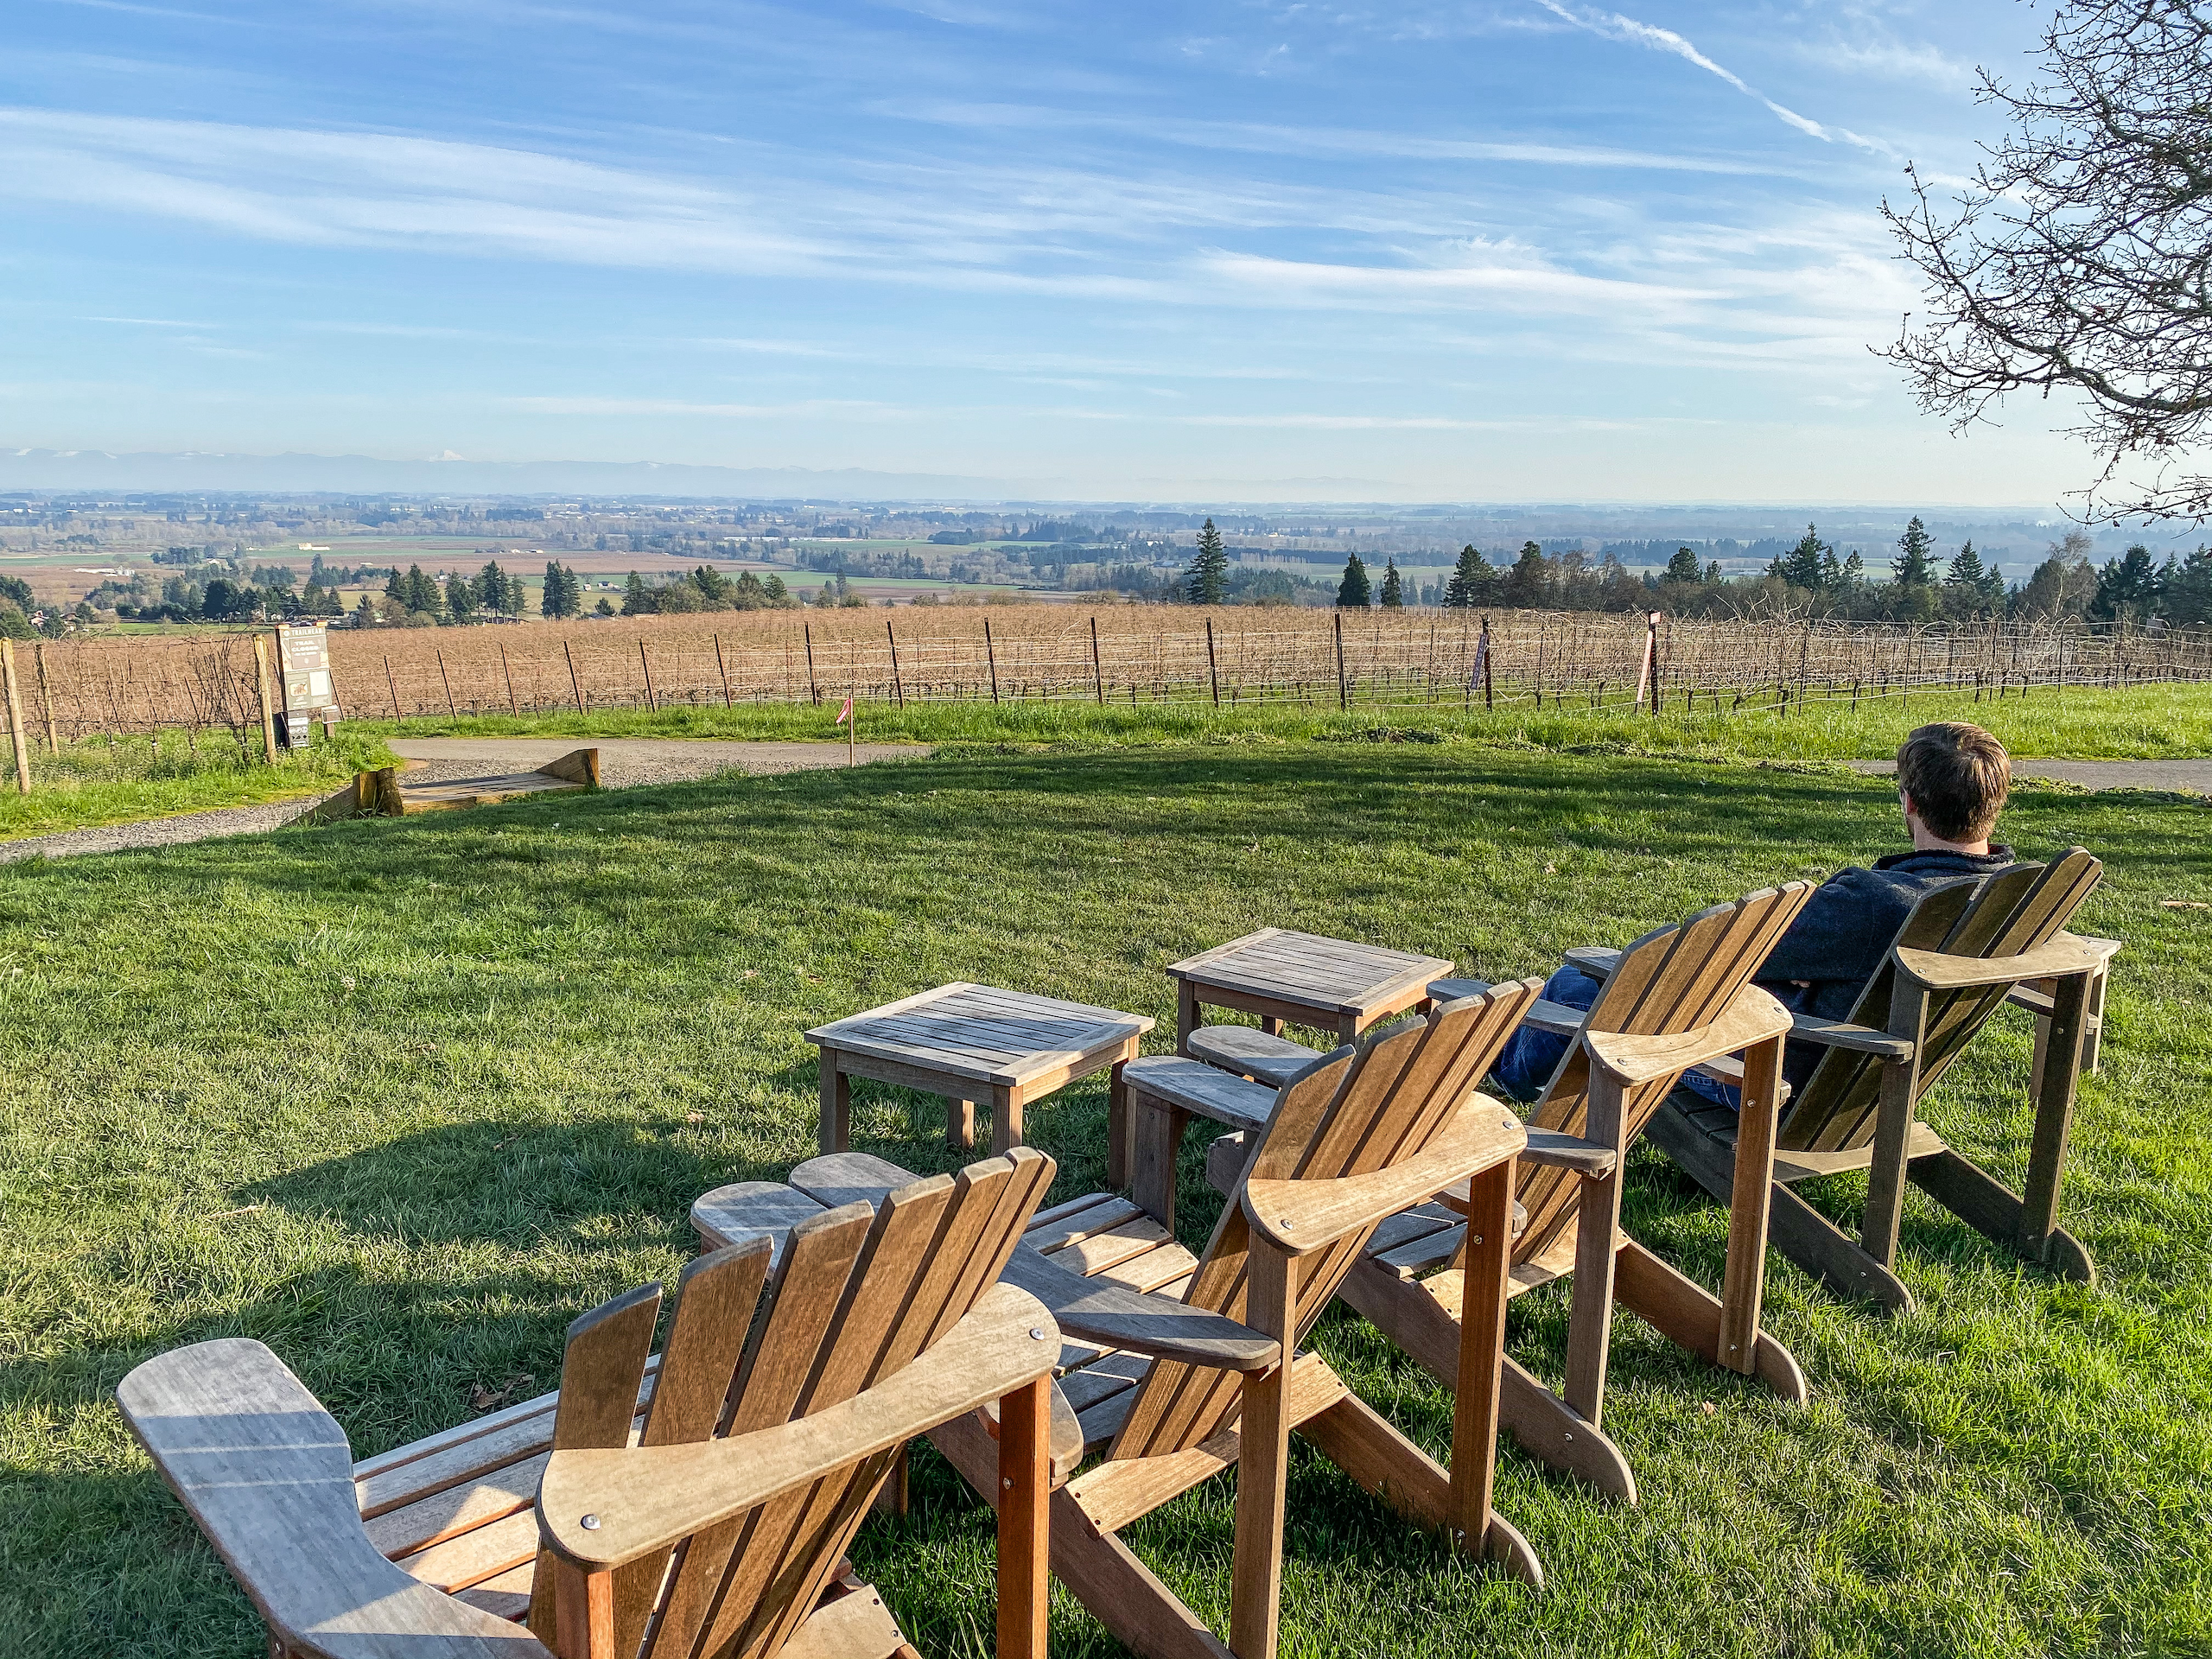 View overlooking Willamette Valley at Durant Vineyards. The best wineries in Willamette Valley. Durant at Red Ridge Farms. Dayton, Oregon. Willamette Valley wineries.